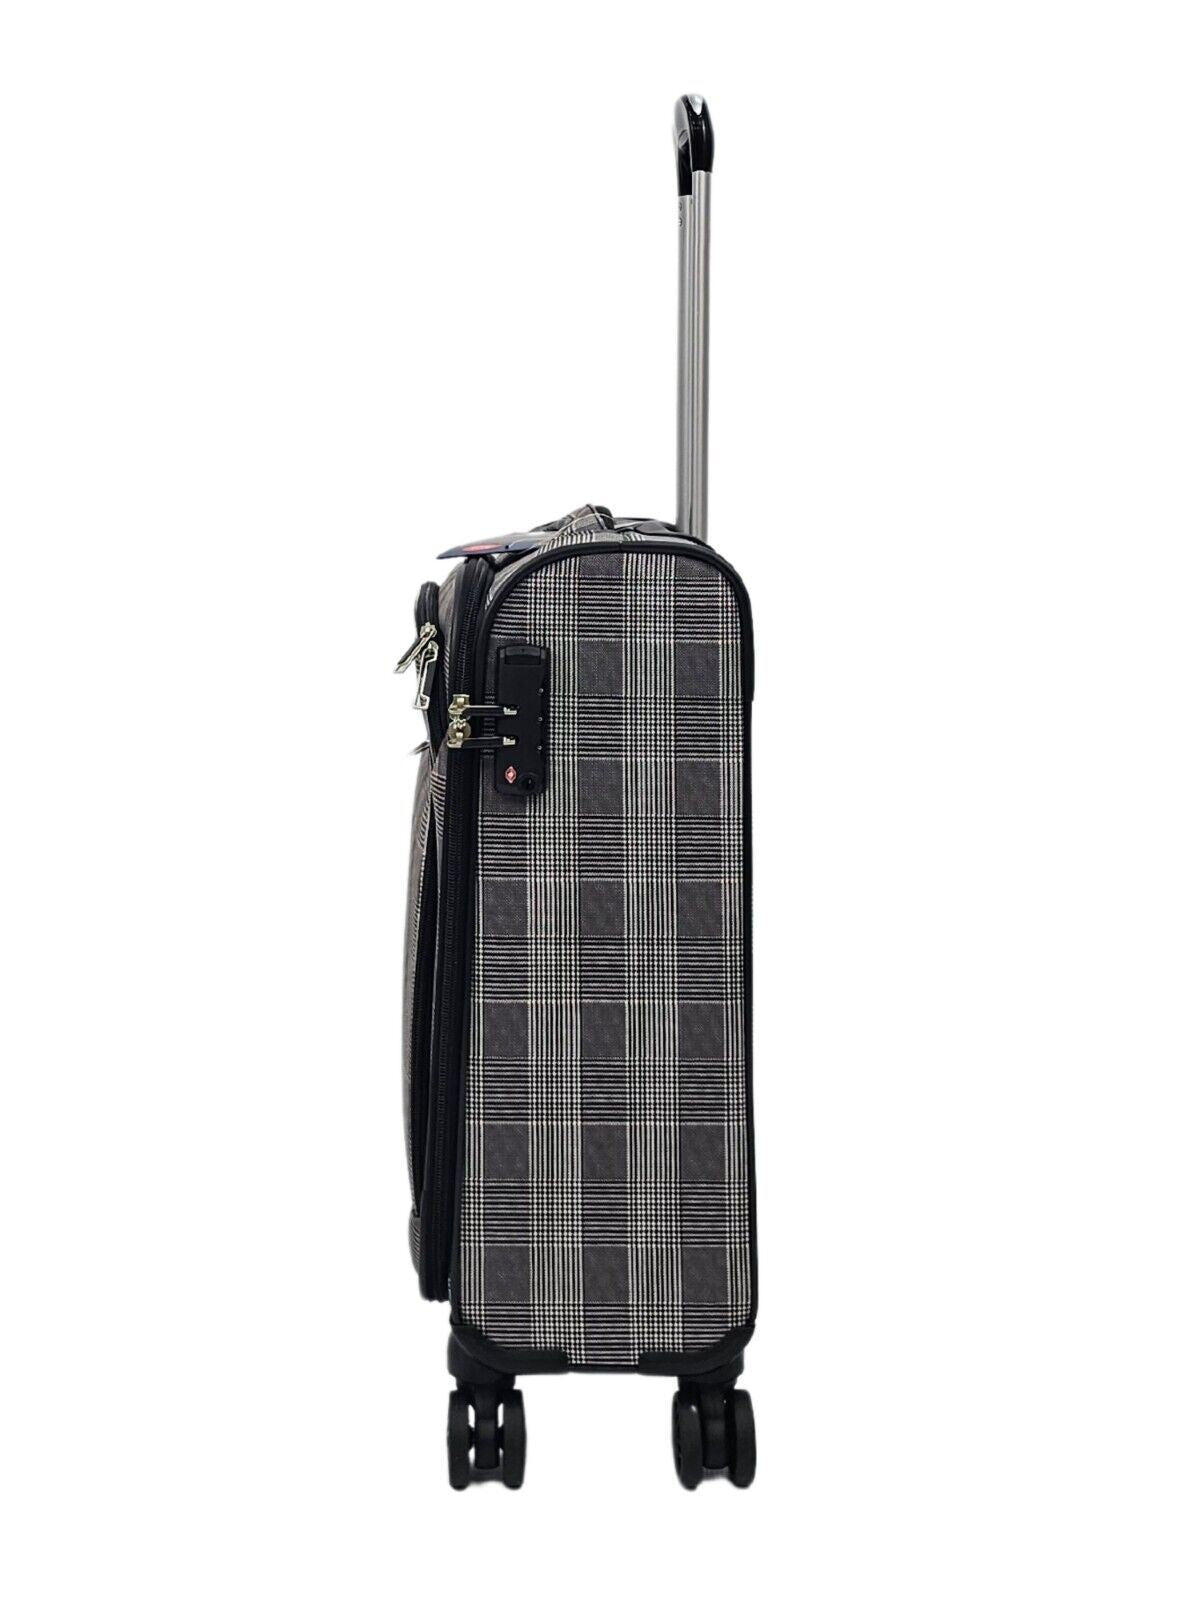 Lightweight Suitcases 8 Wheel Luggage Stripes Travel Soft Bags